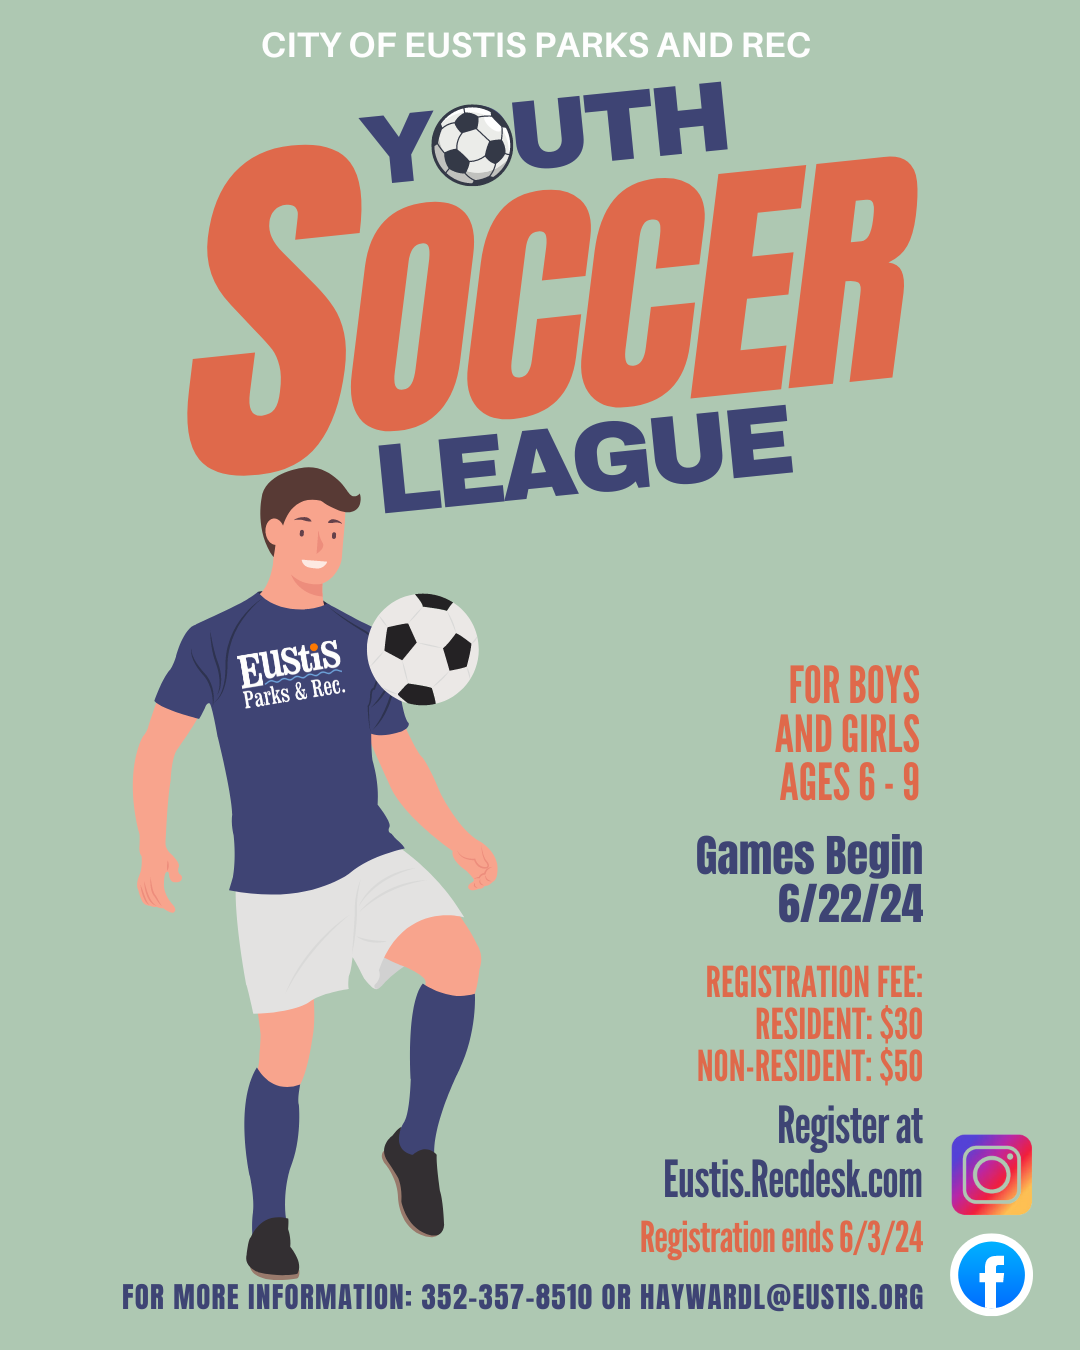 Registration for the youth soccer league is open until June 3rd, 2024.